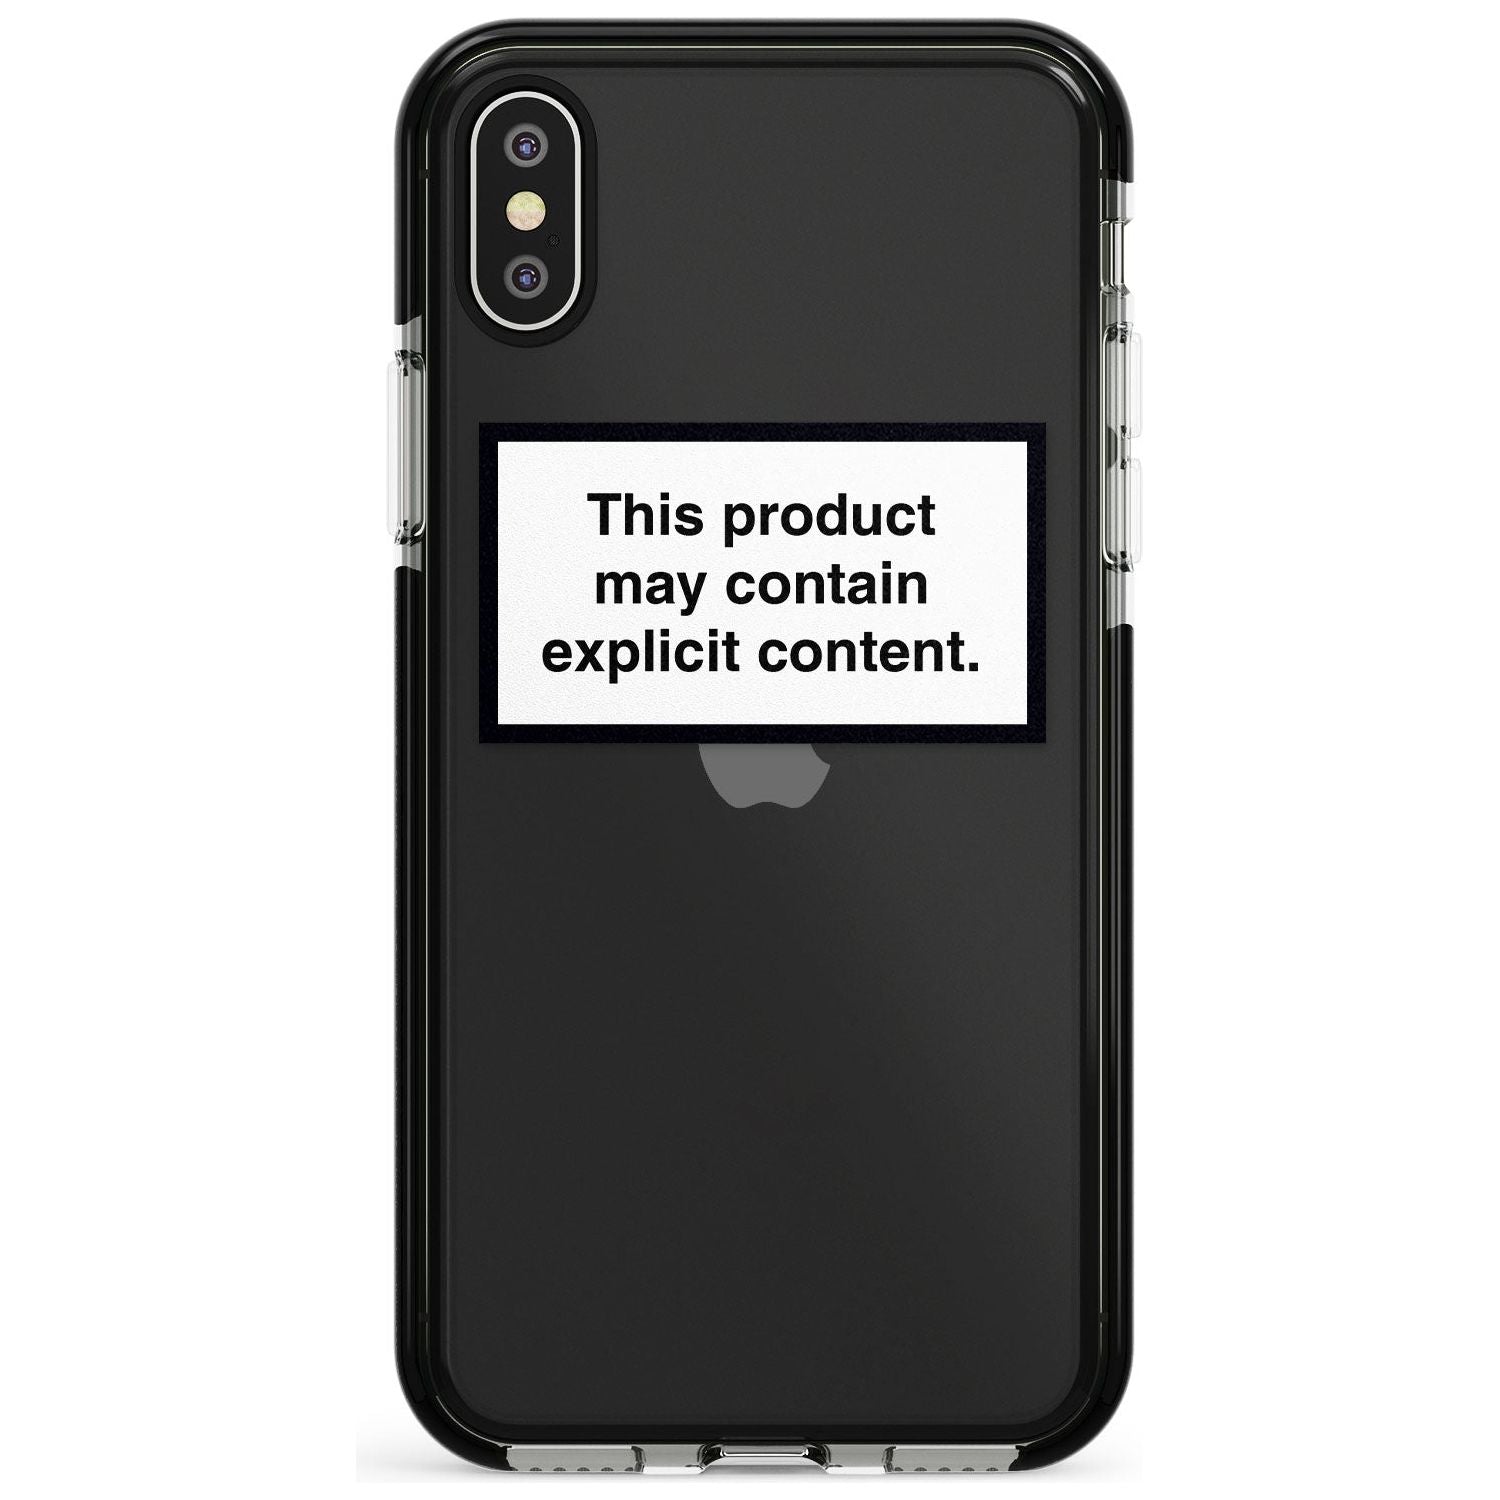 This product may contain explicit content Pink Fade Impact Phone Case for iPhone X XS Max XR